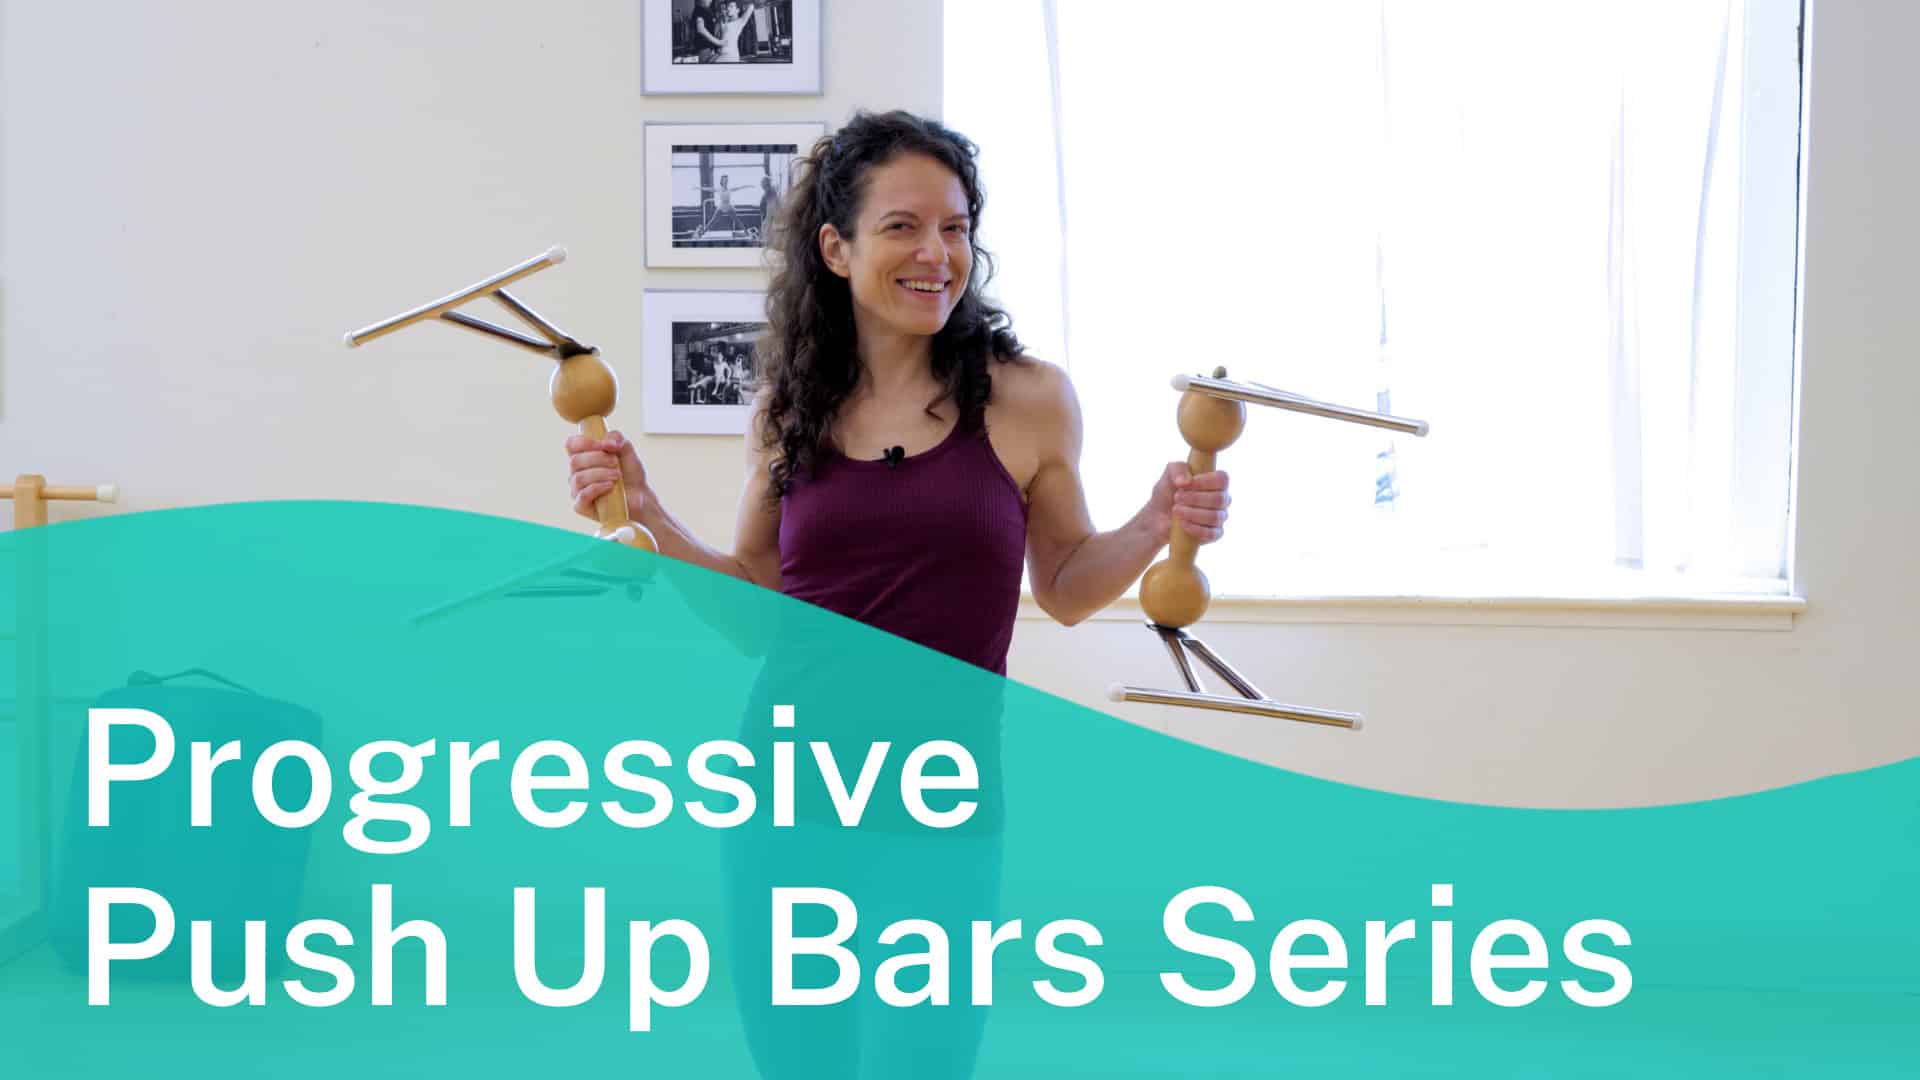 Pilates Push Up Bars workout Series with Elaine Ewing